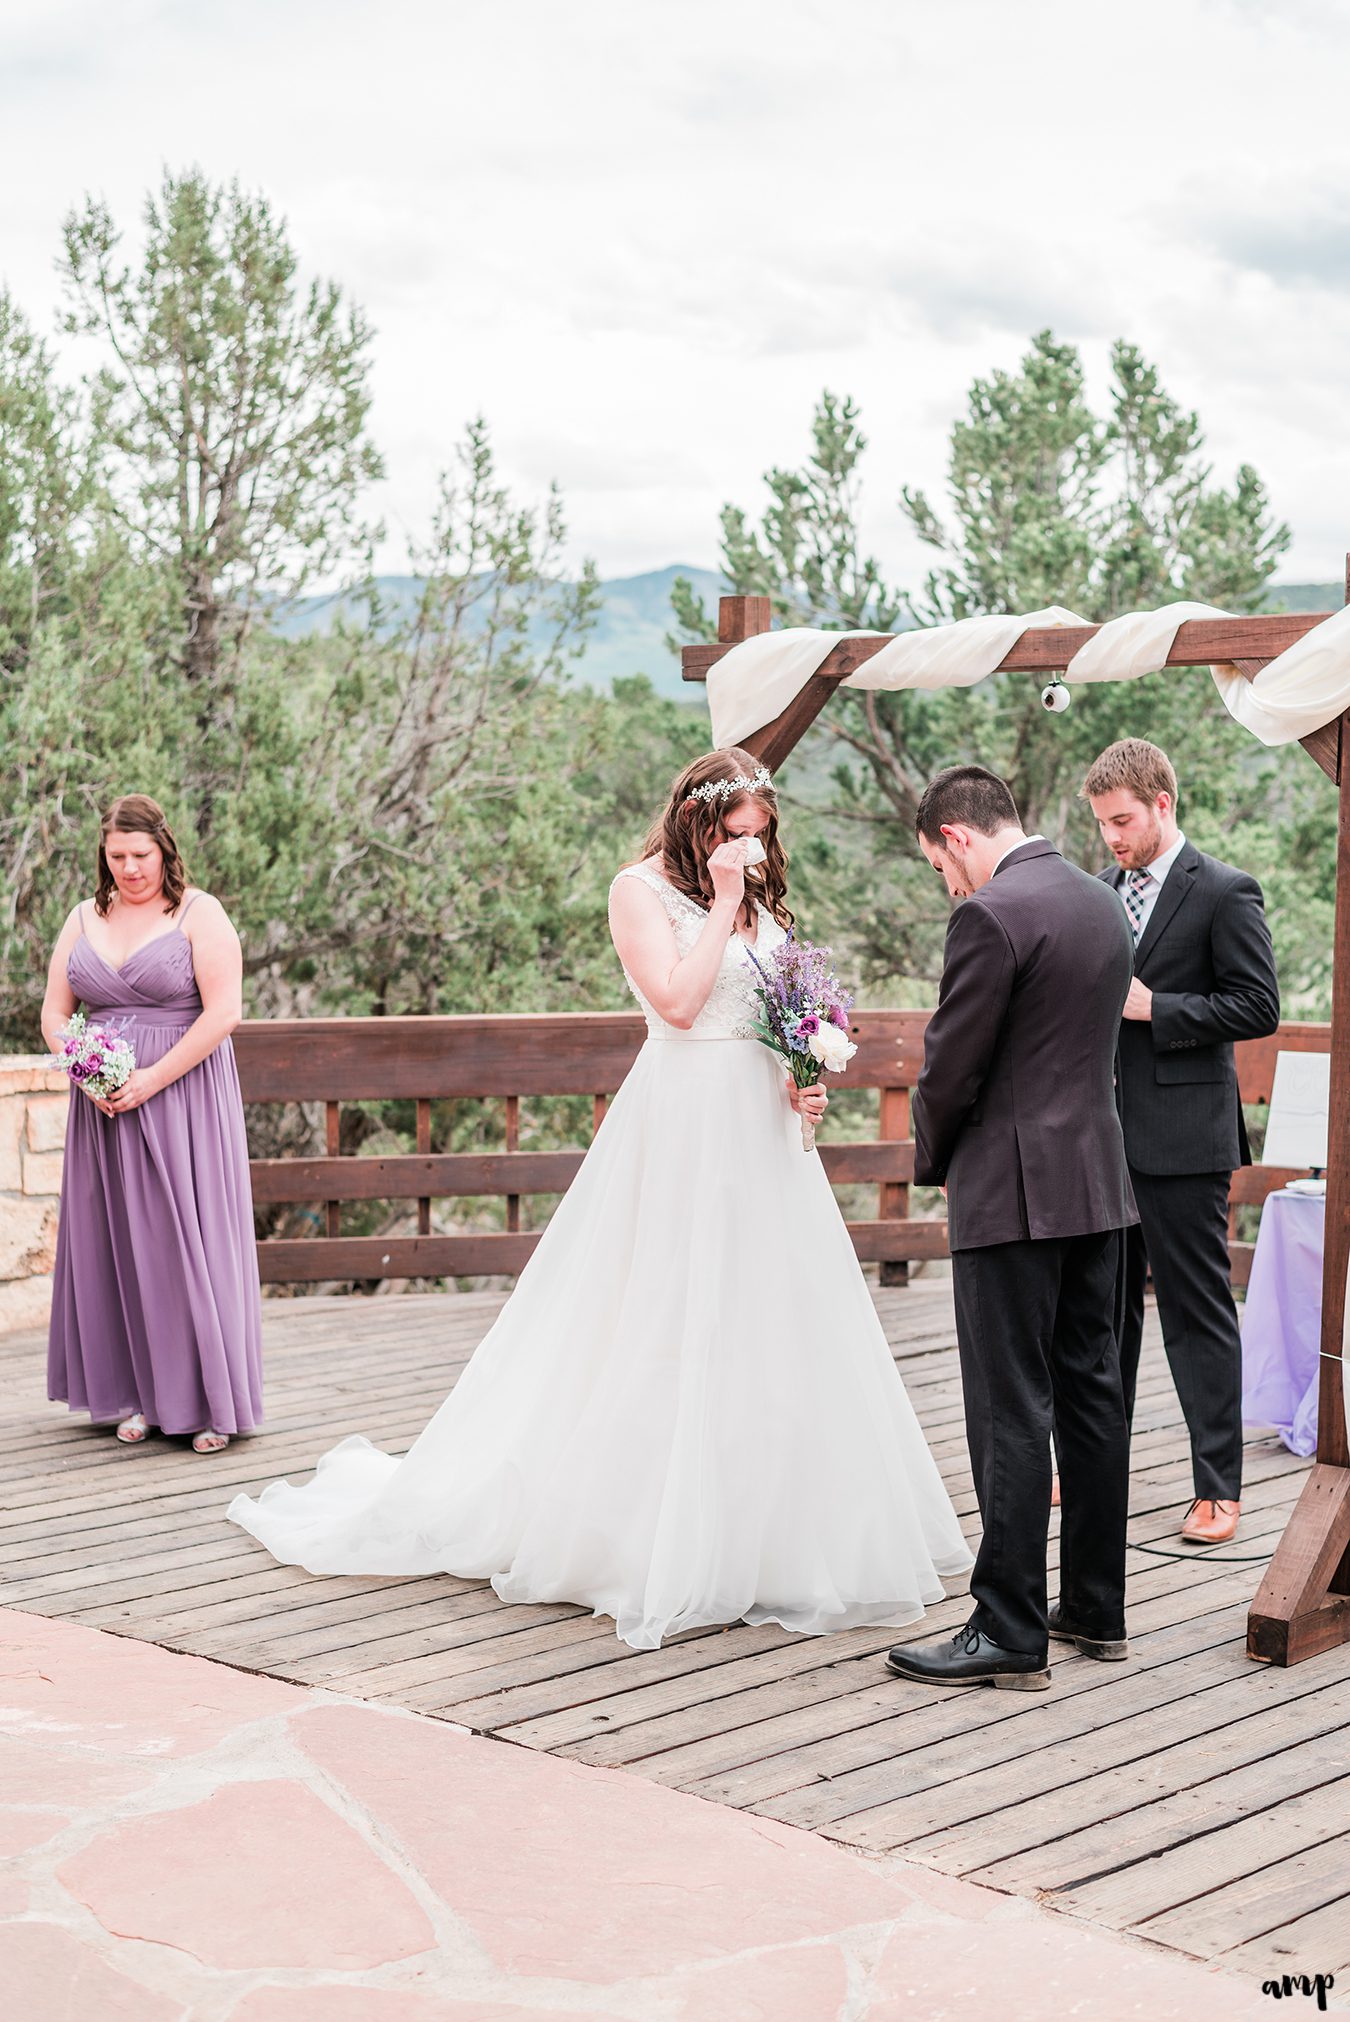 Erica wipes away a tear during their Ridgway State Park elopement ceremony